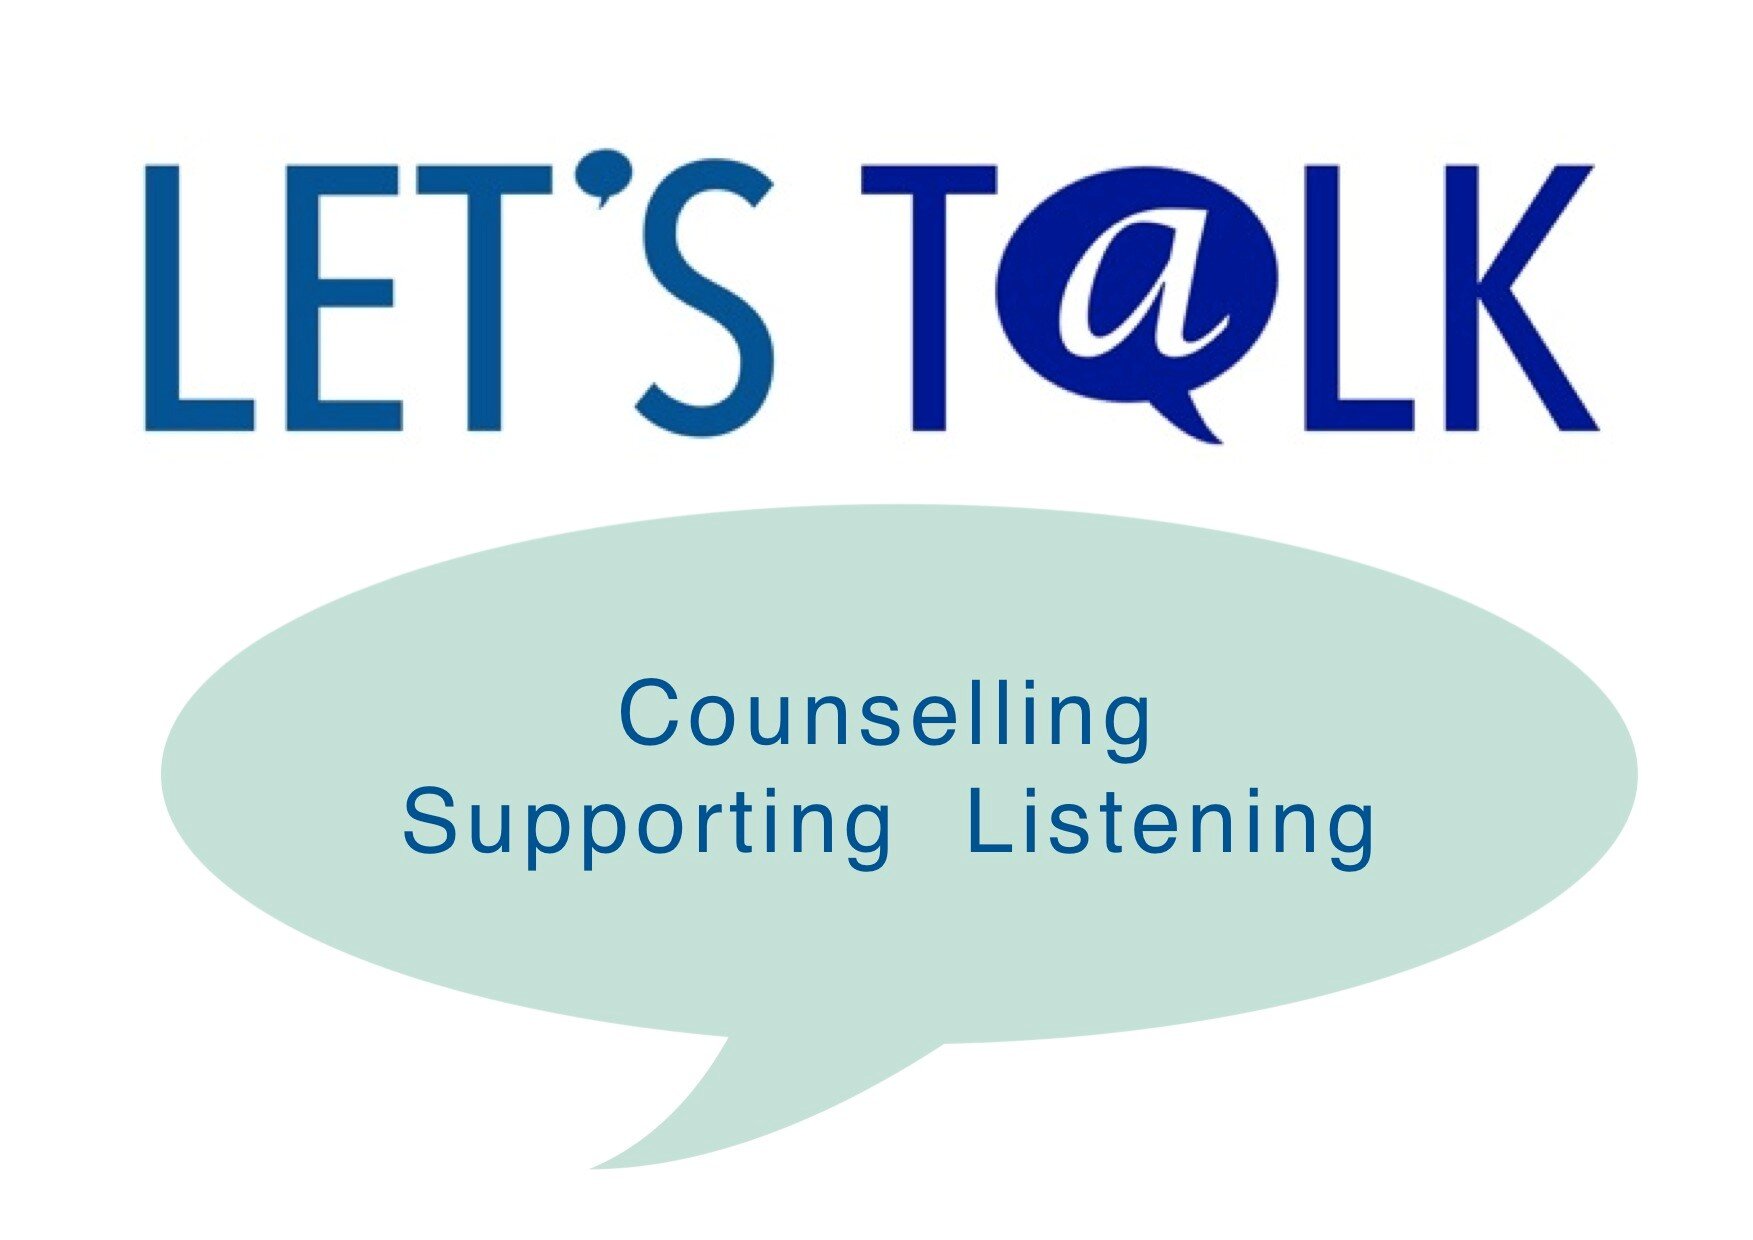 An @gaddumcentre  project providing #Counselling #Listening #support, a wrap around service across #Rochdale, #Heywood & #Middleton